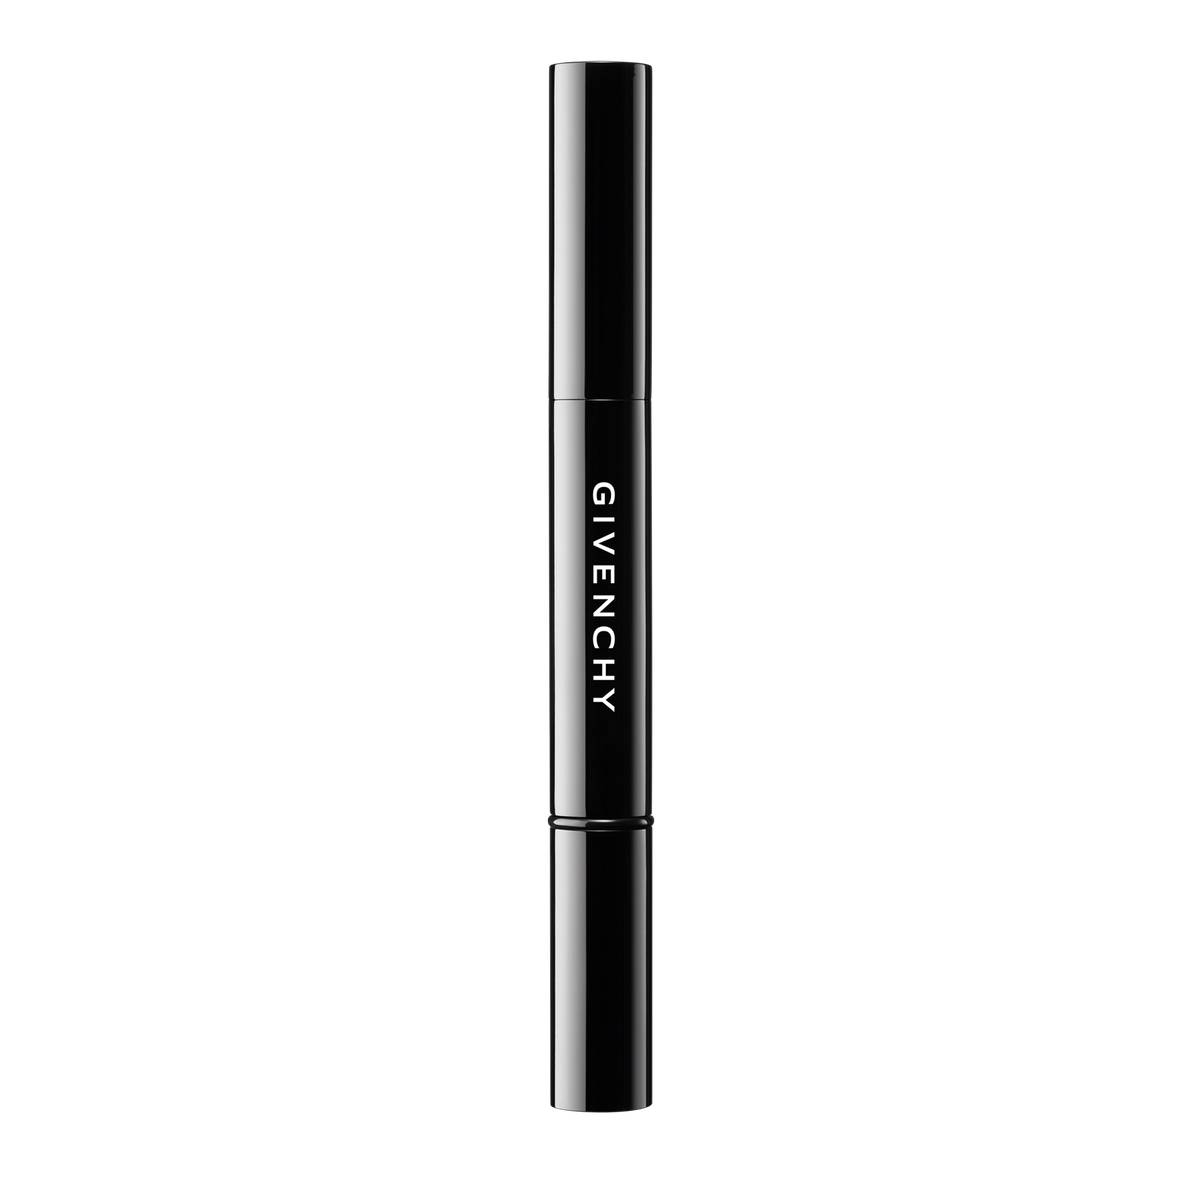 Givenchy Teint Mister Instant Corrective Pen 1.6 ml Light Beige von Givenchy